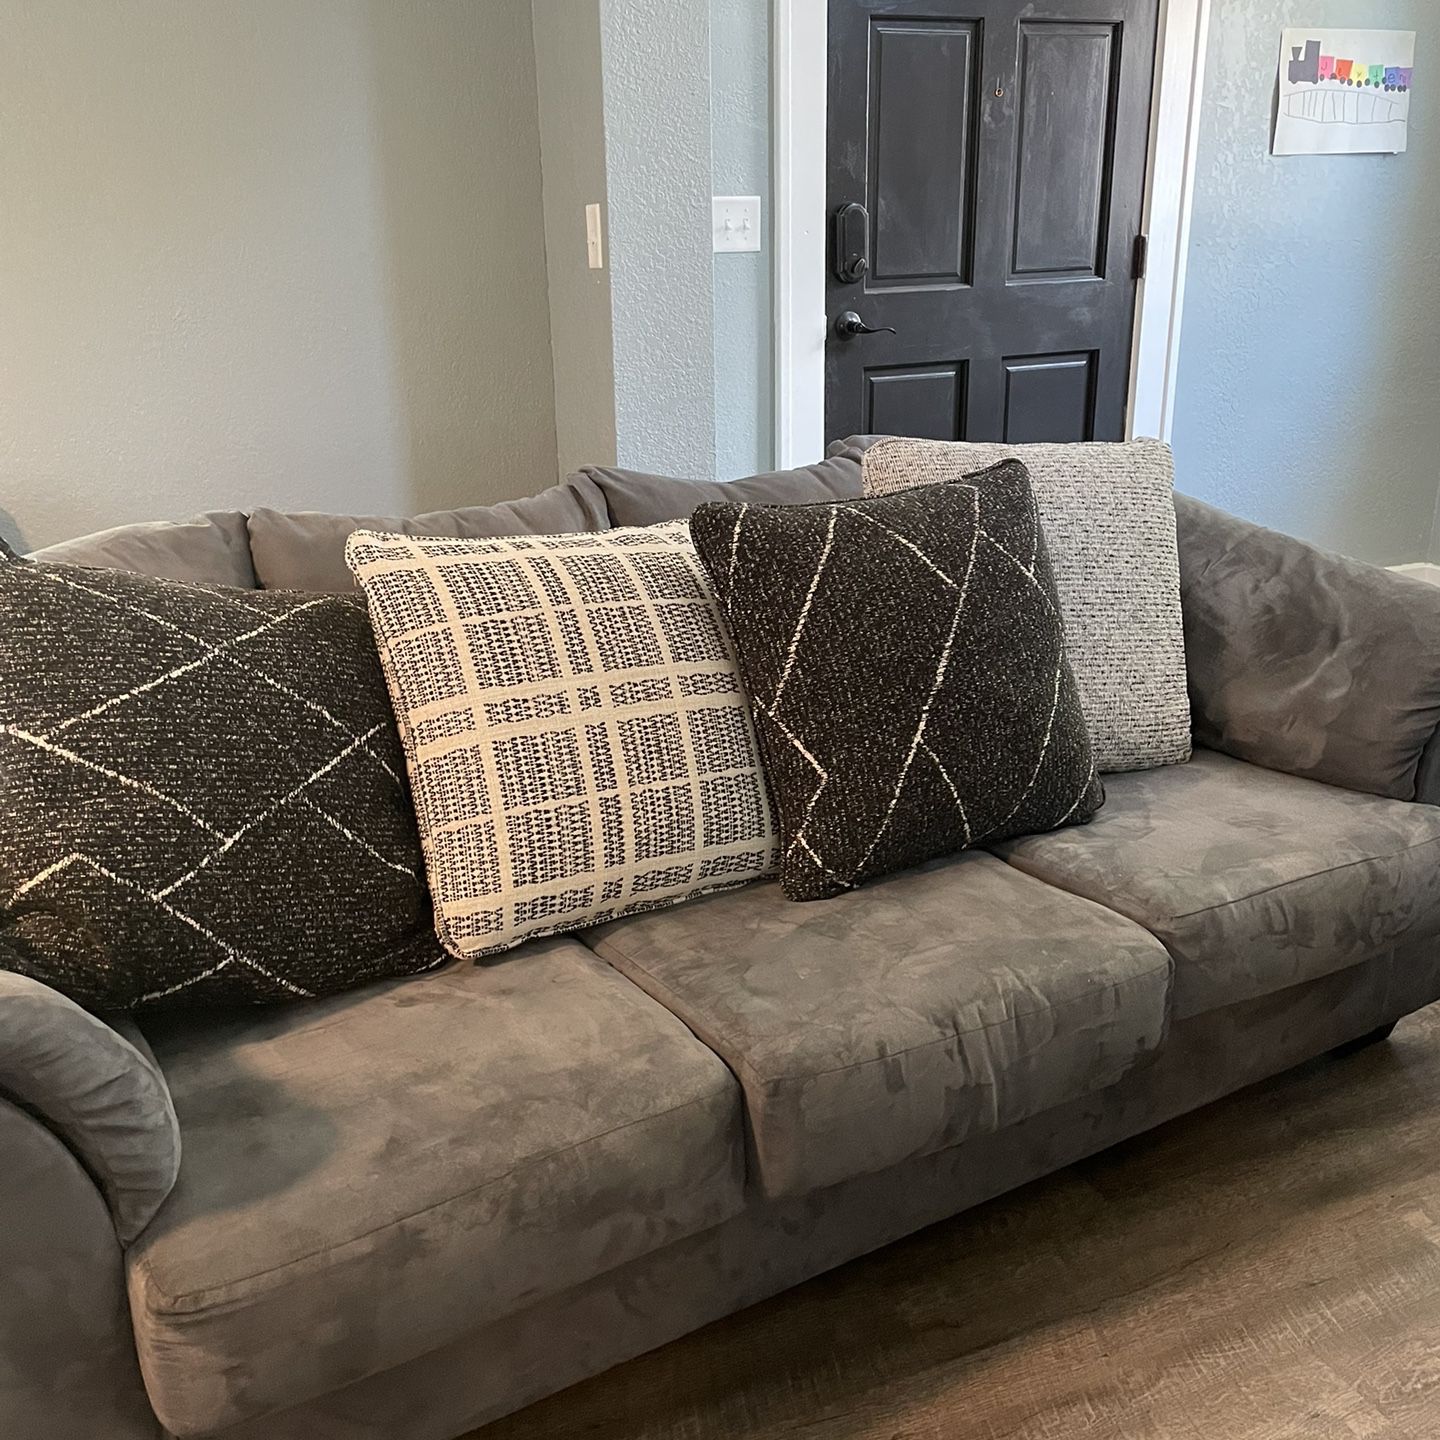 4 Couches For sales 